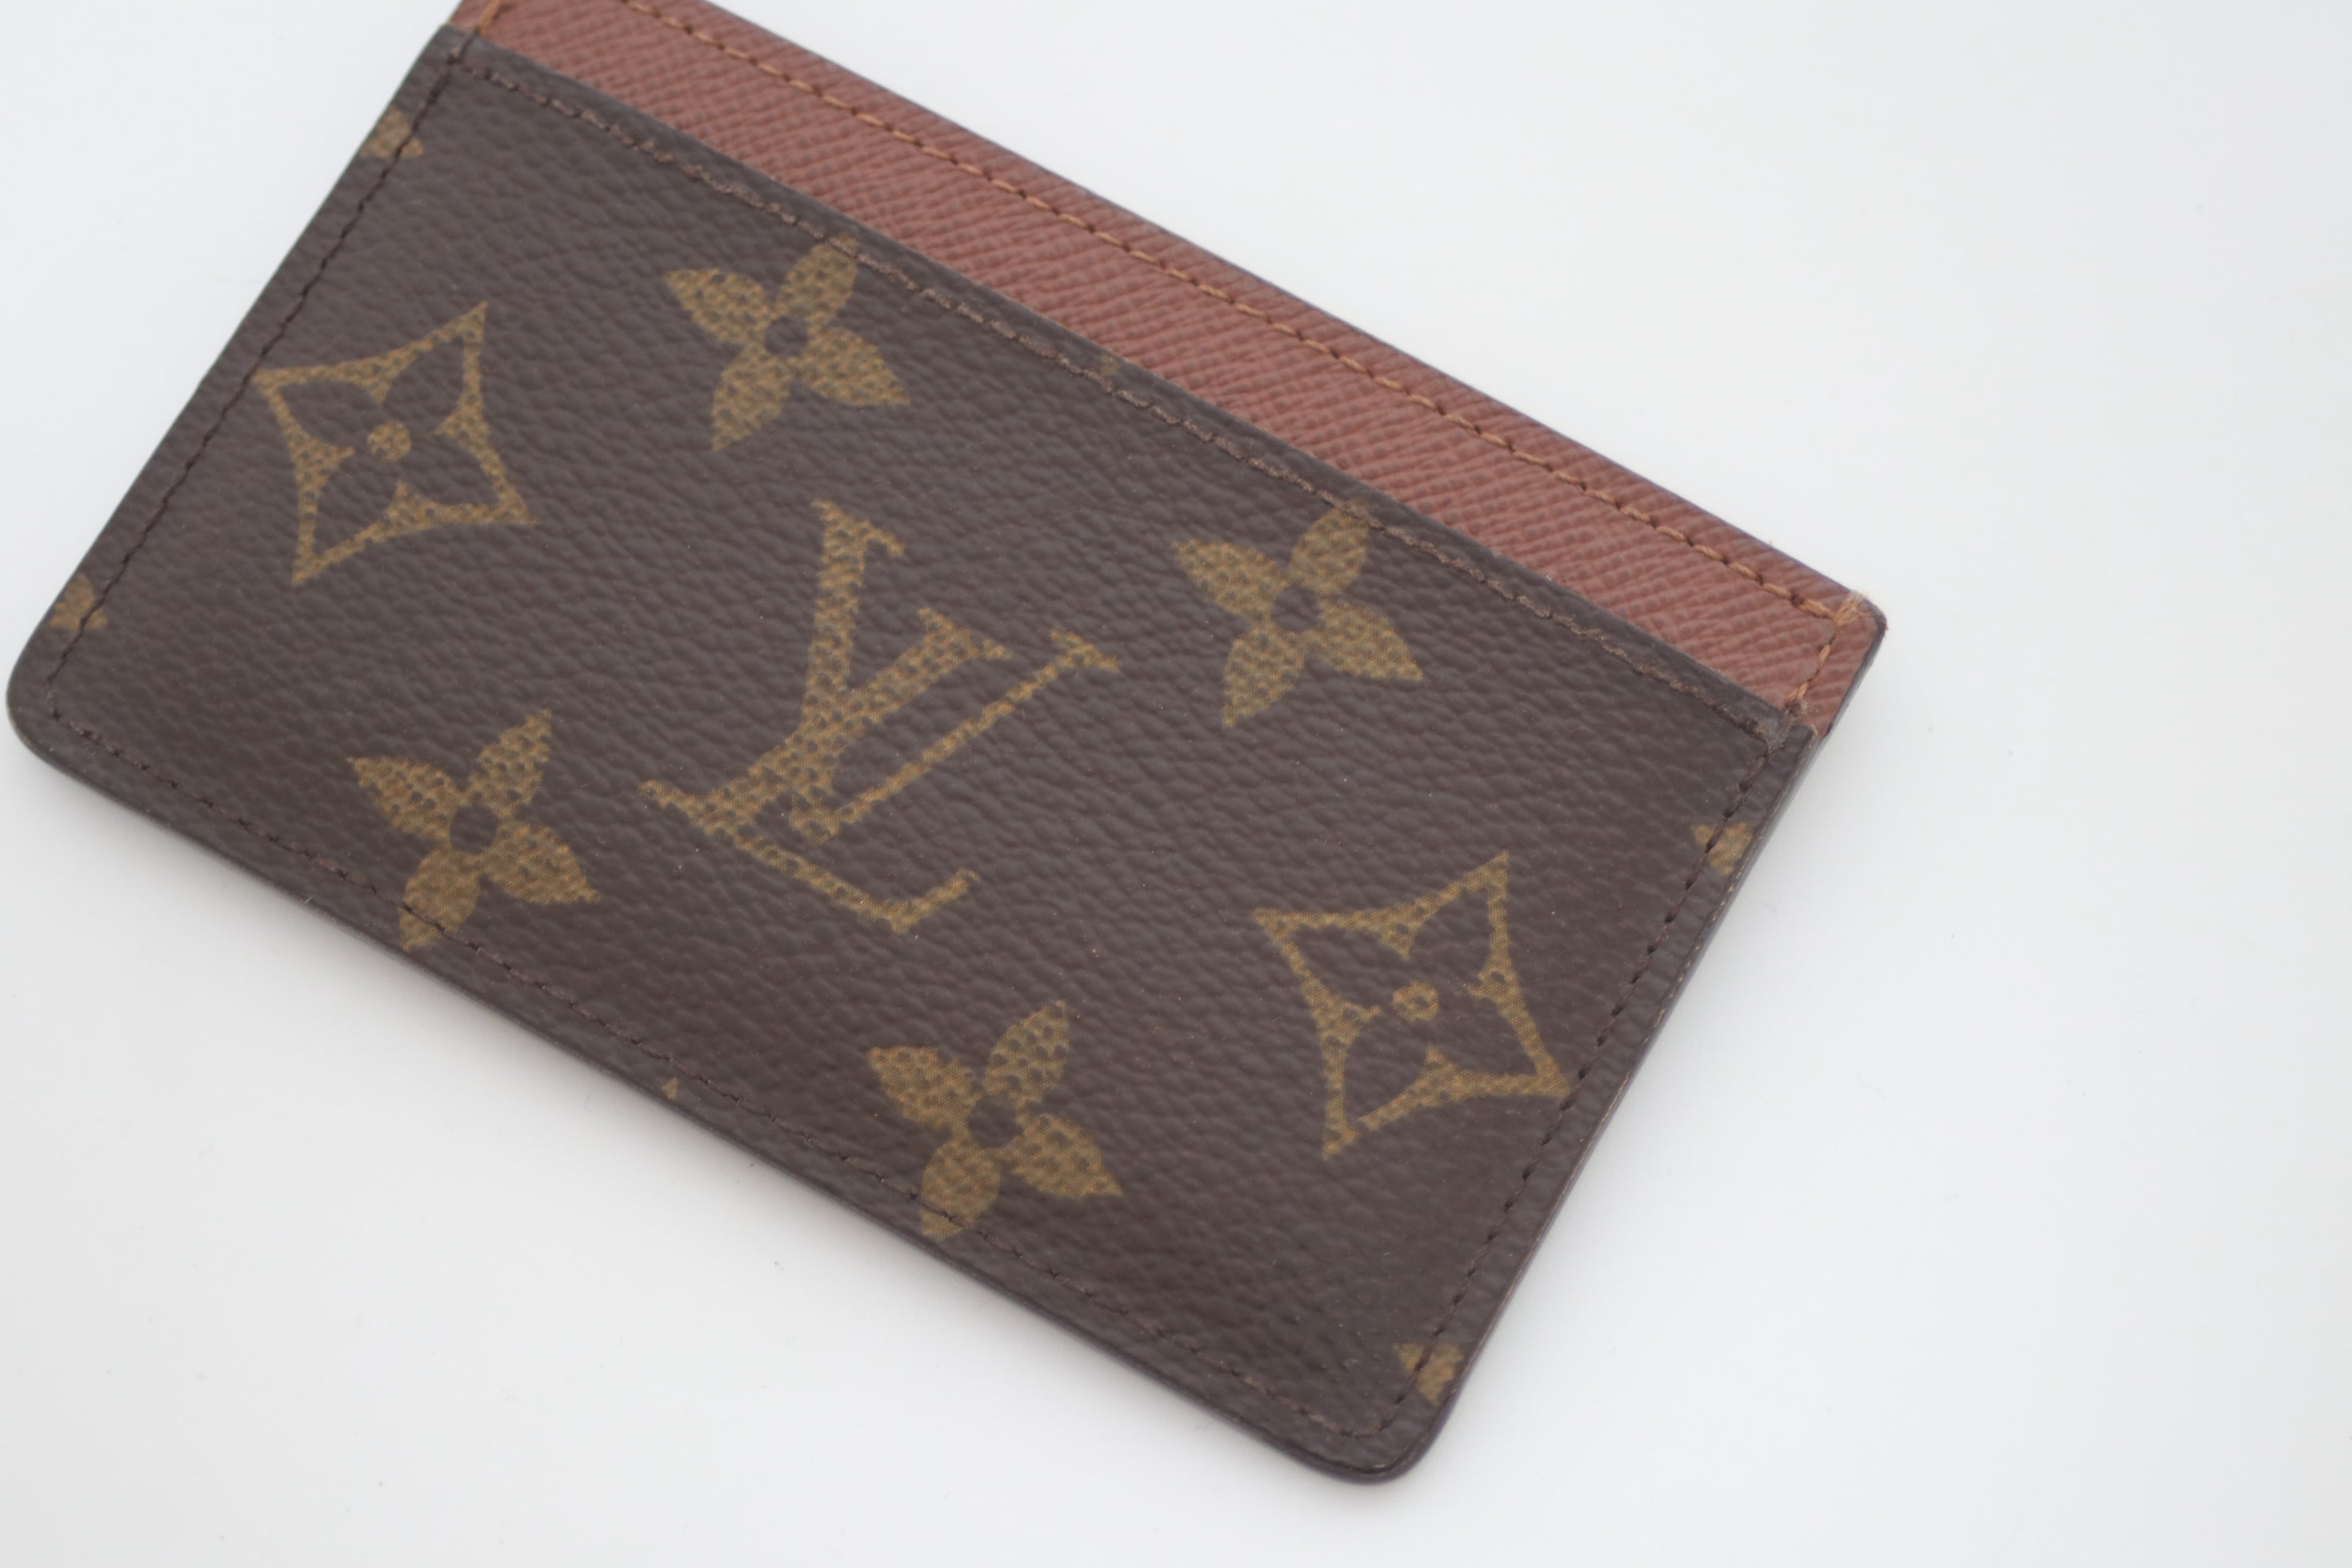 Louis Vuitton Card Case Used (8022)